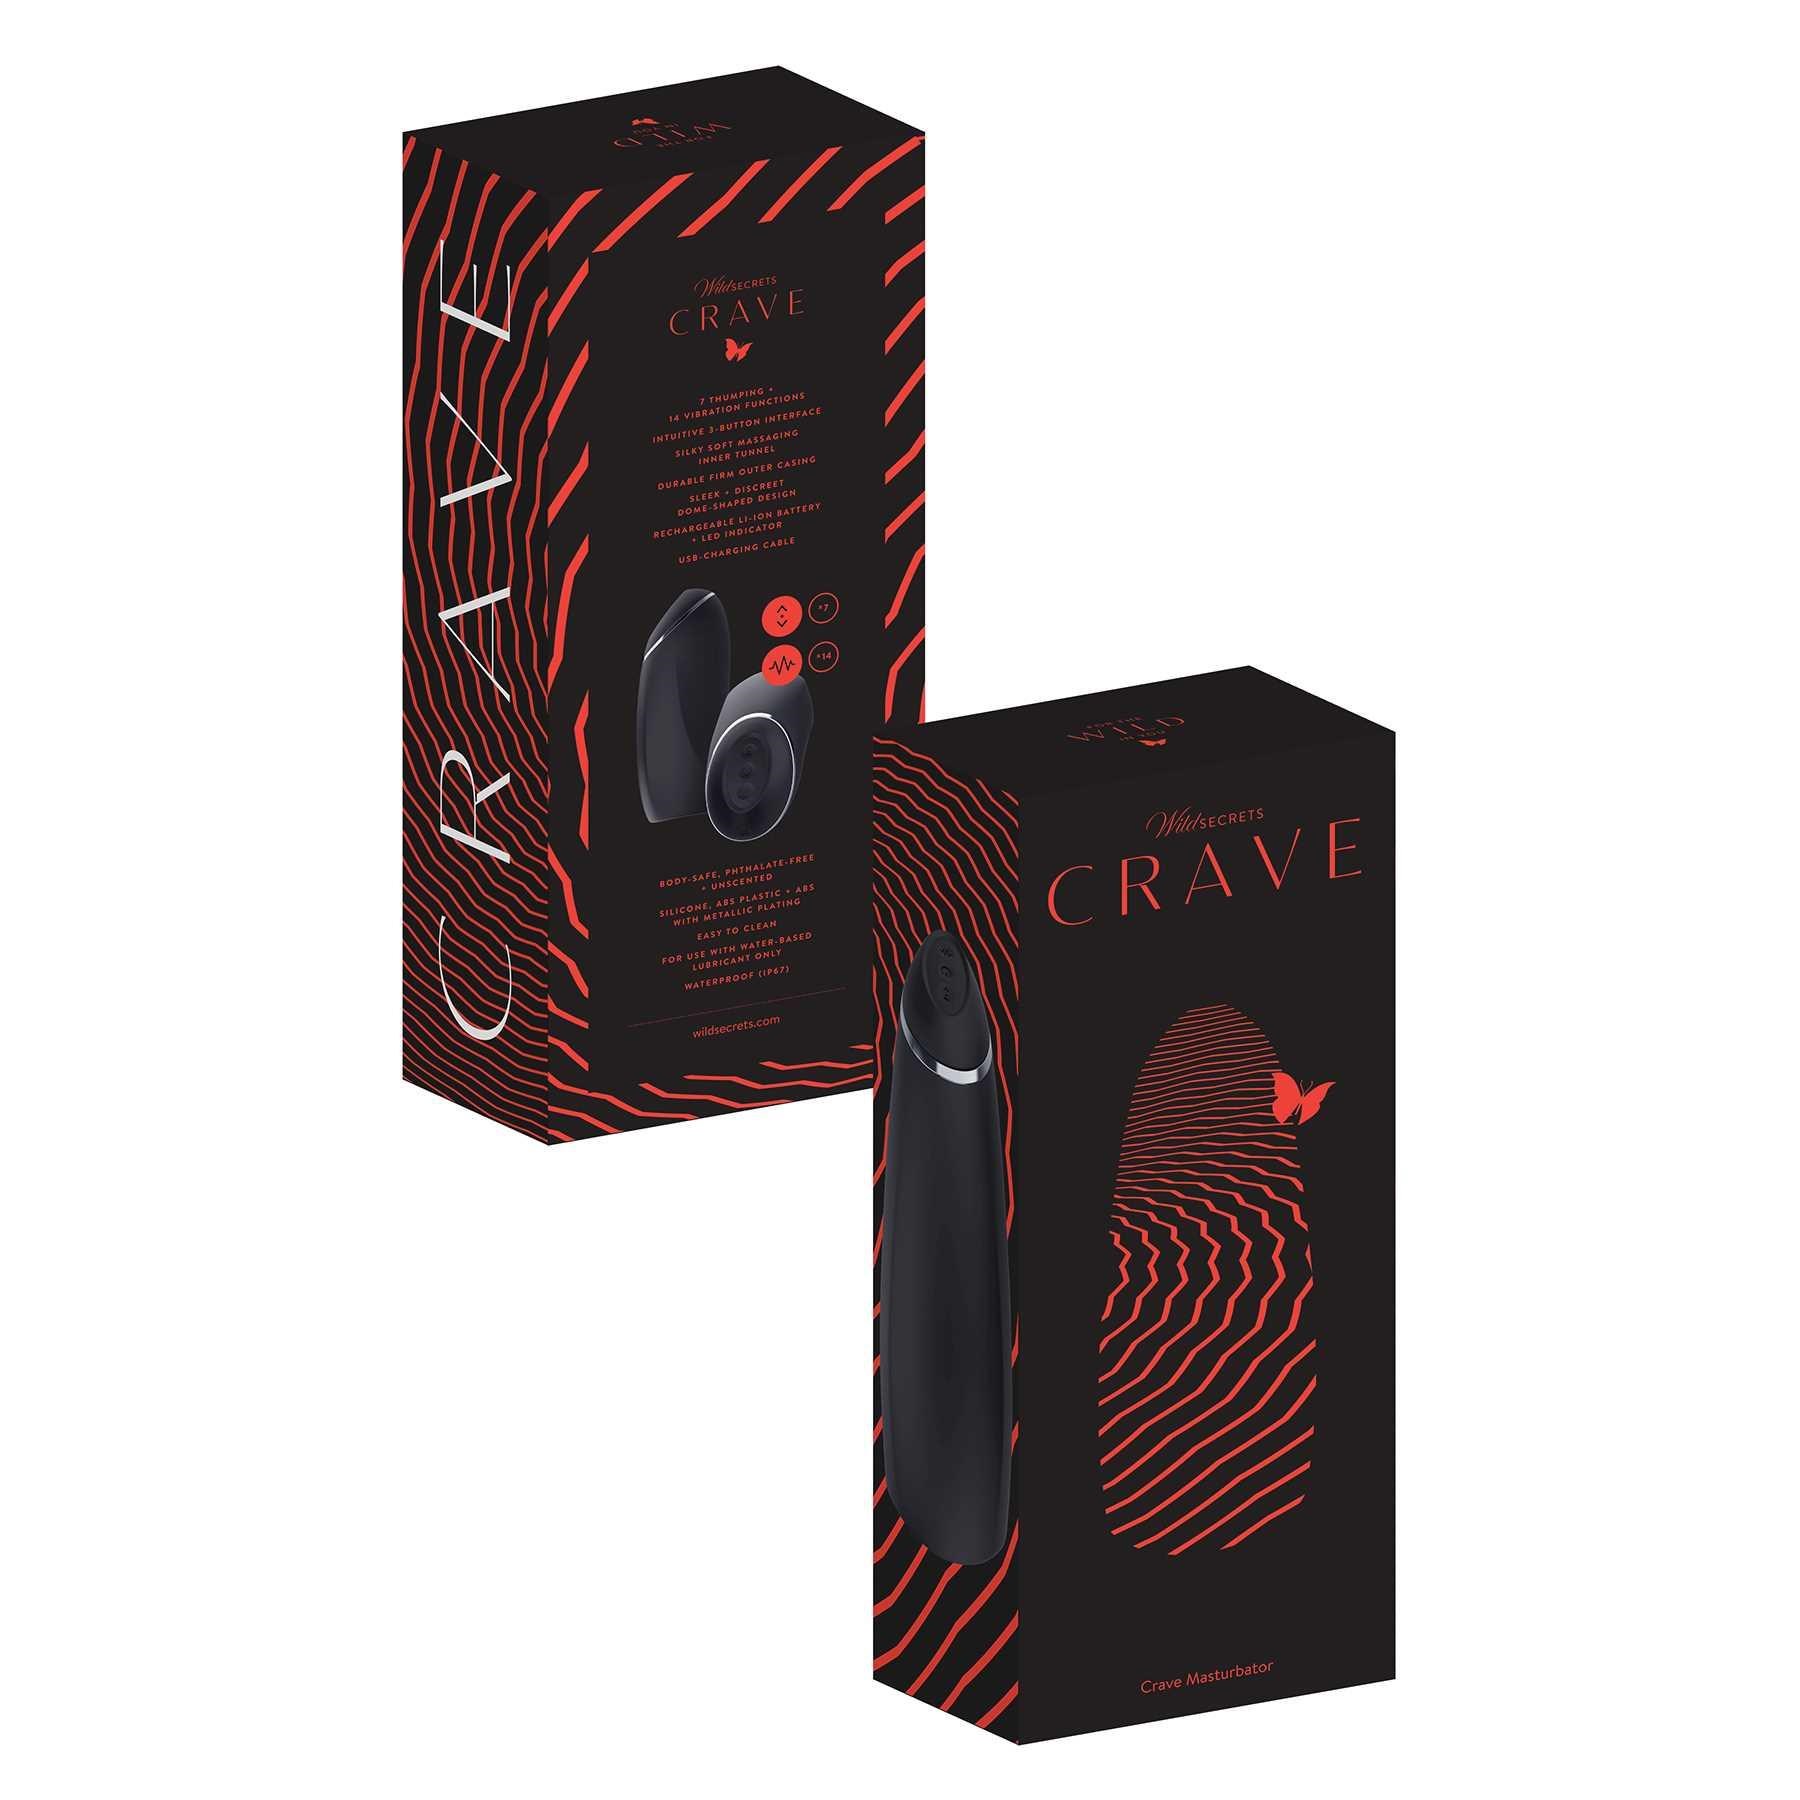 Wild Secrets Crave Thumping & Vibrating Masturbator front and back packaging